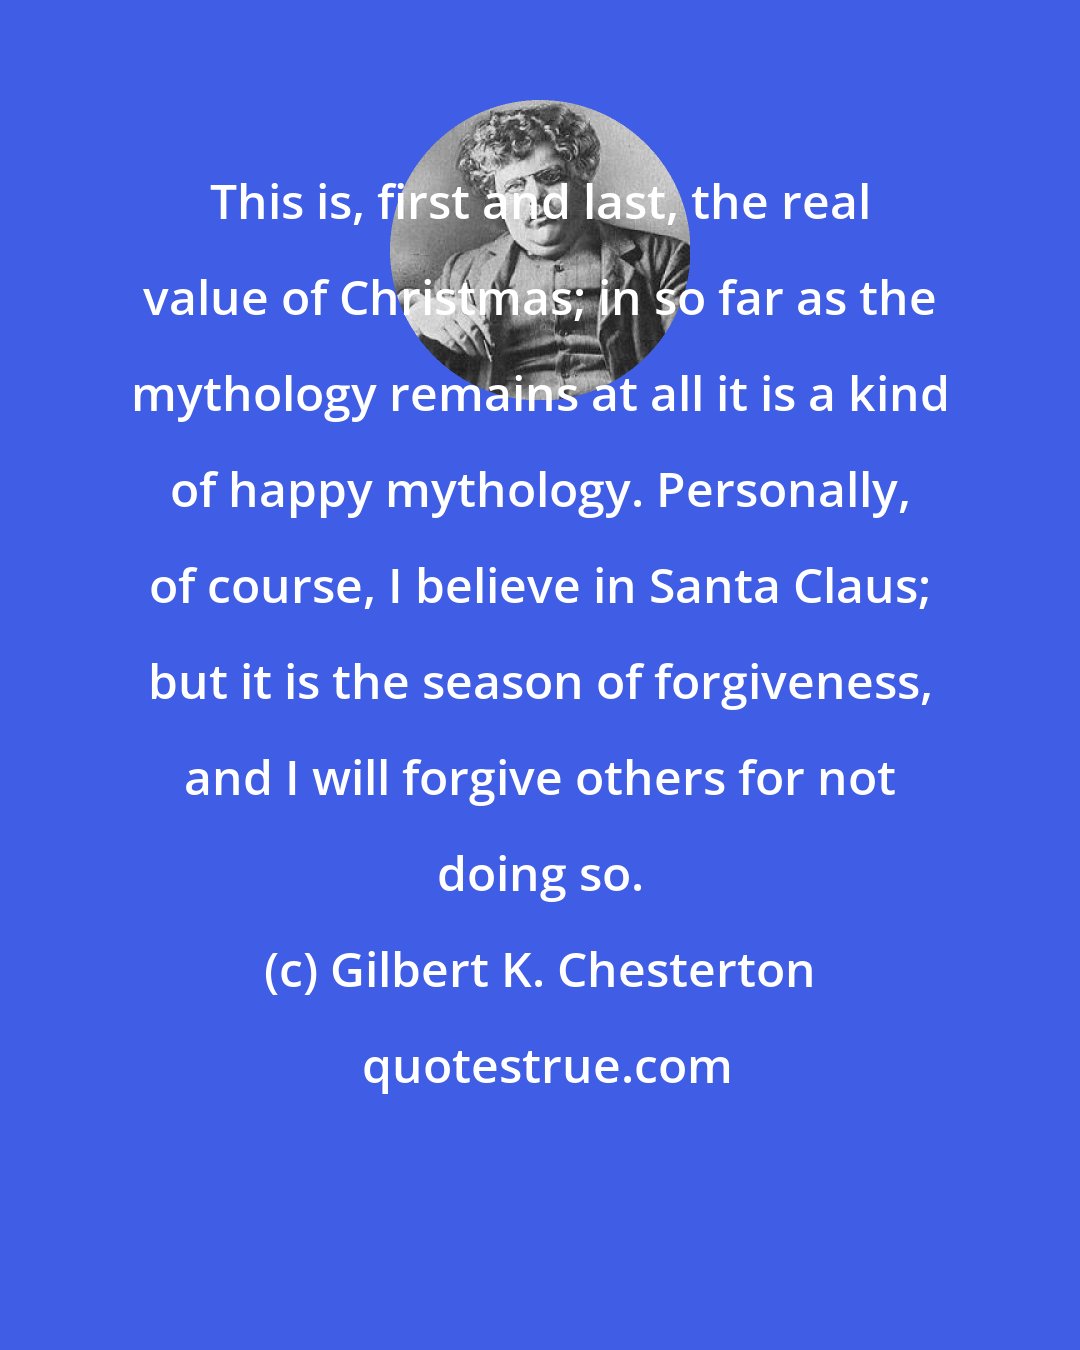 Gilbert K. Chesterton: This is, first and last, the real value of Christmas; in so far as the mythology remains at all it is a kind of happy mythology. Personally, of course, I believe in Santa Claus; but it is the season of forgiveness, and I will forgive others for not doing so.